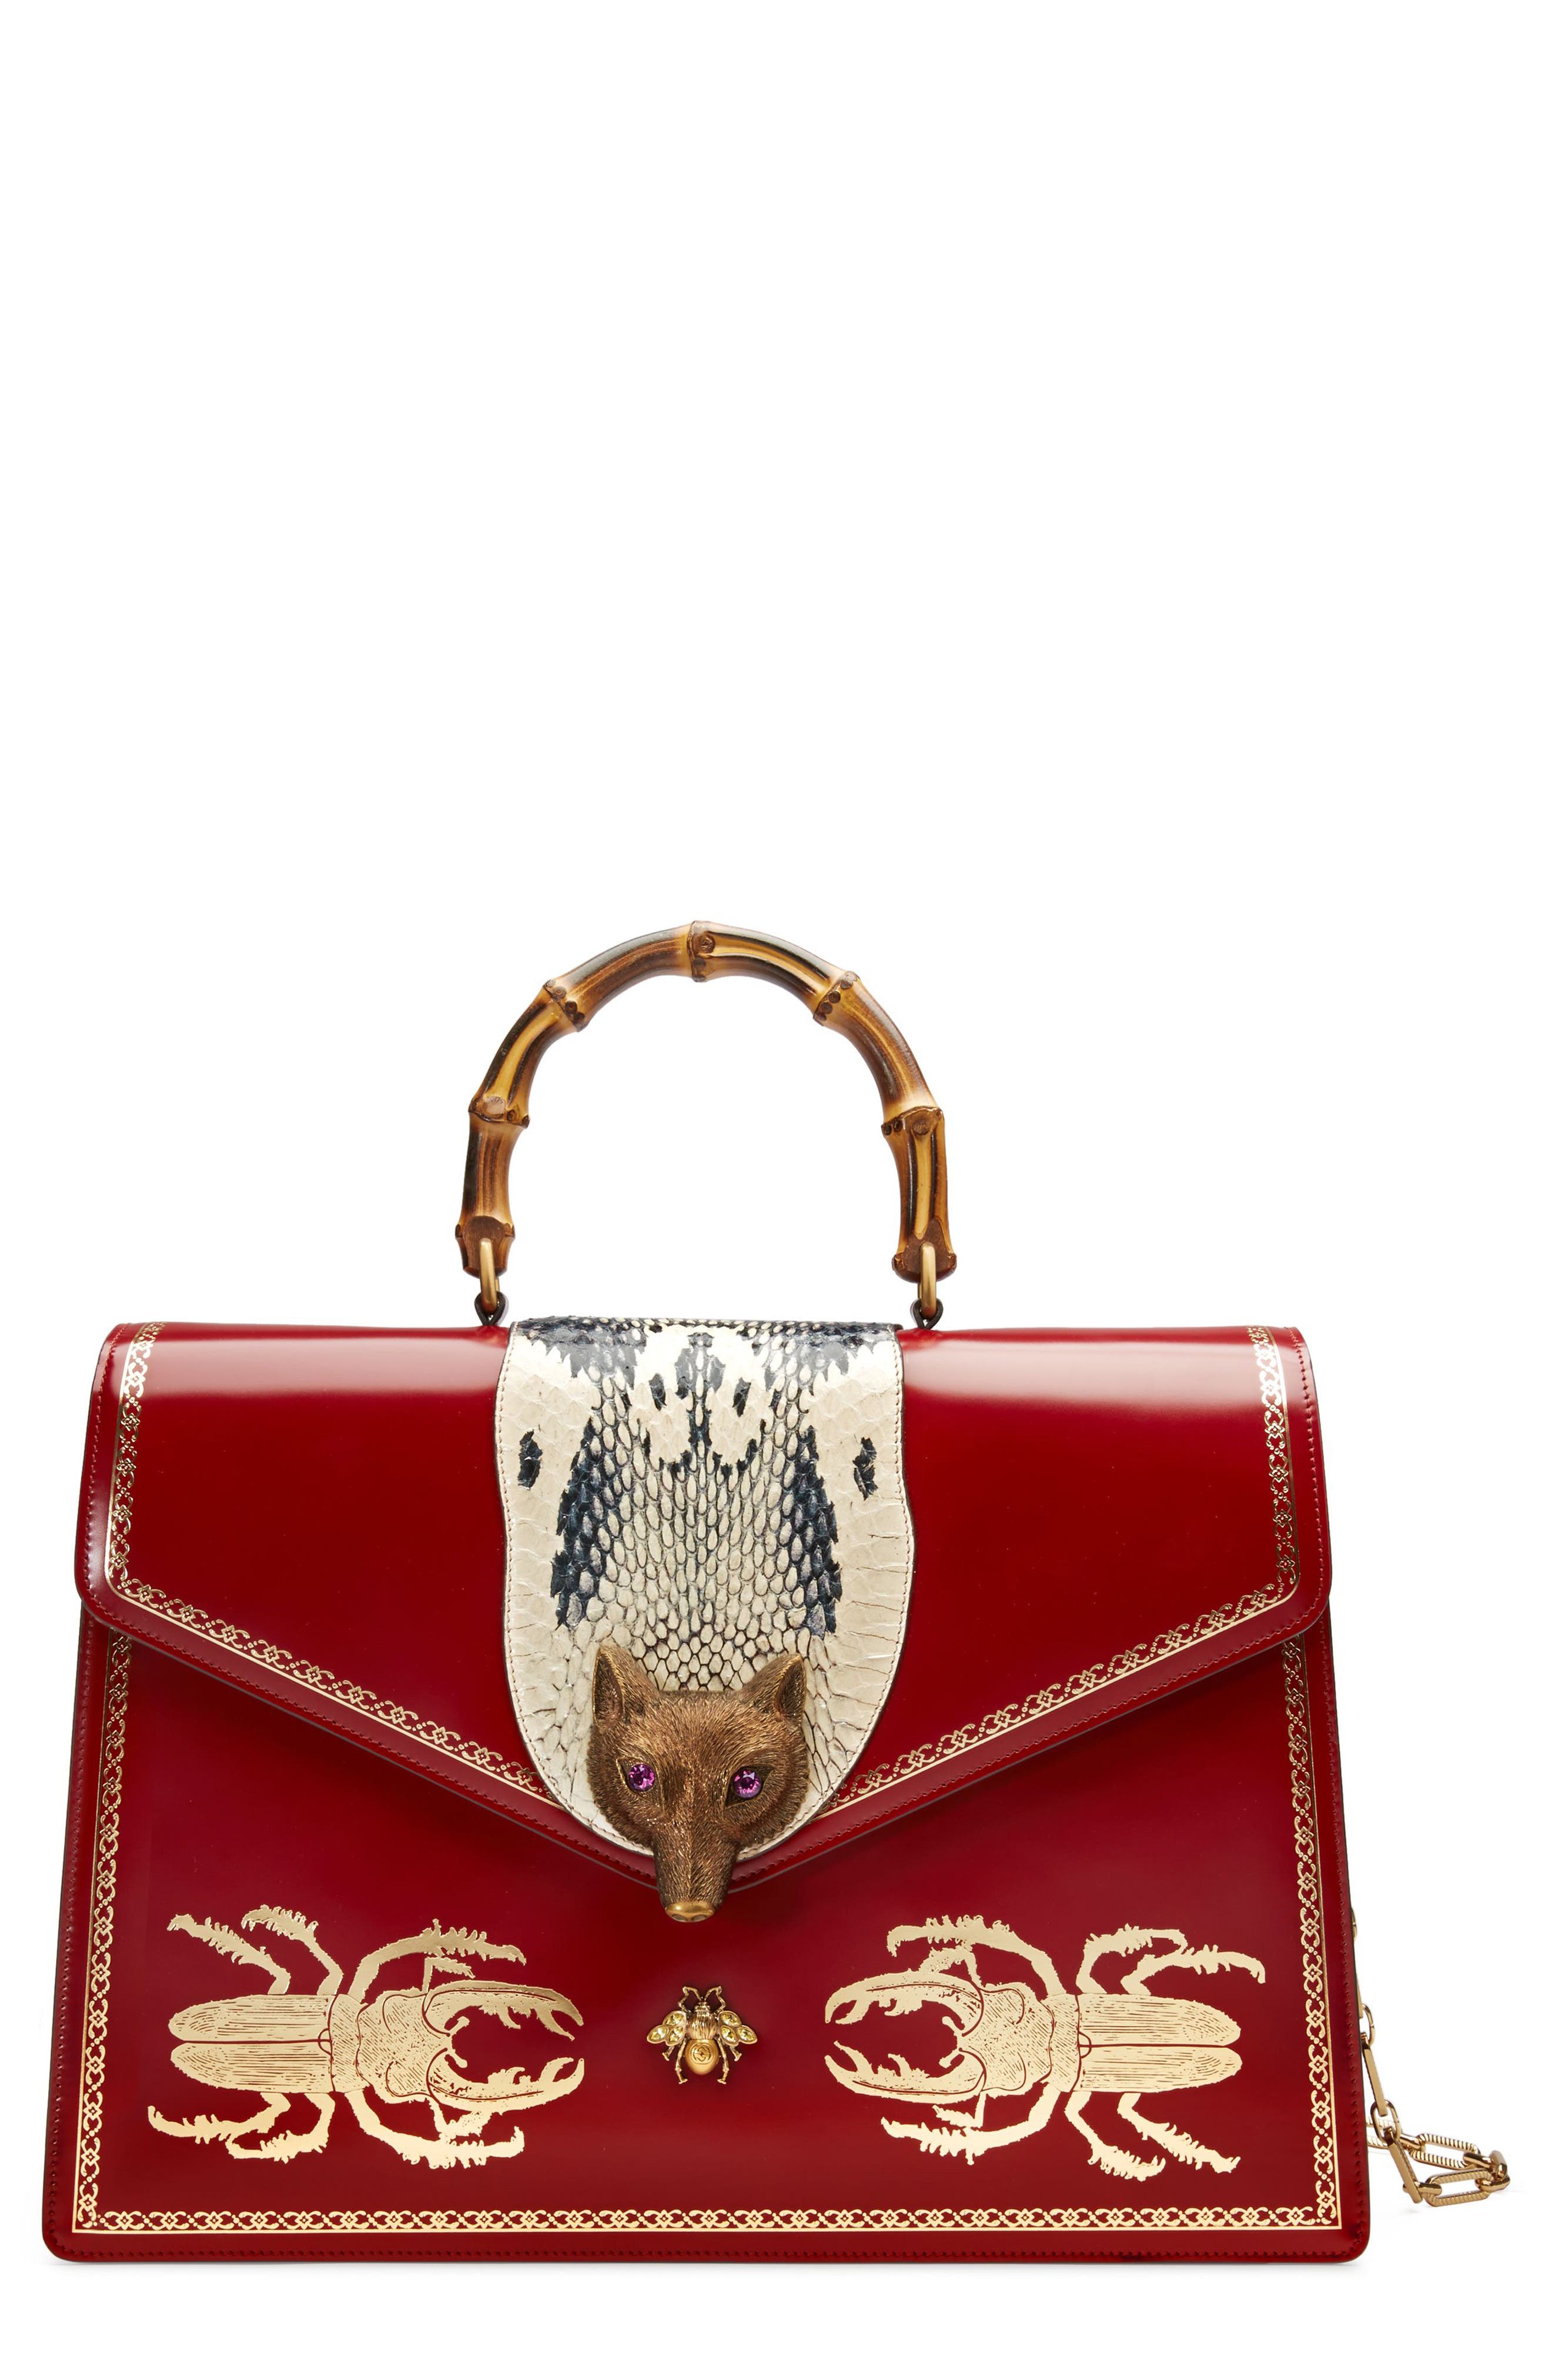 Gucci Large Broche Beetle Print Leather 